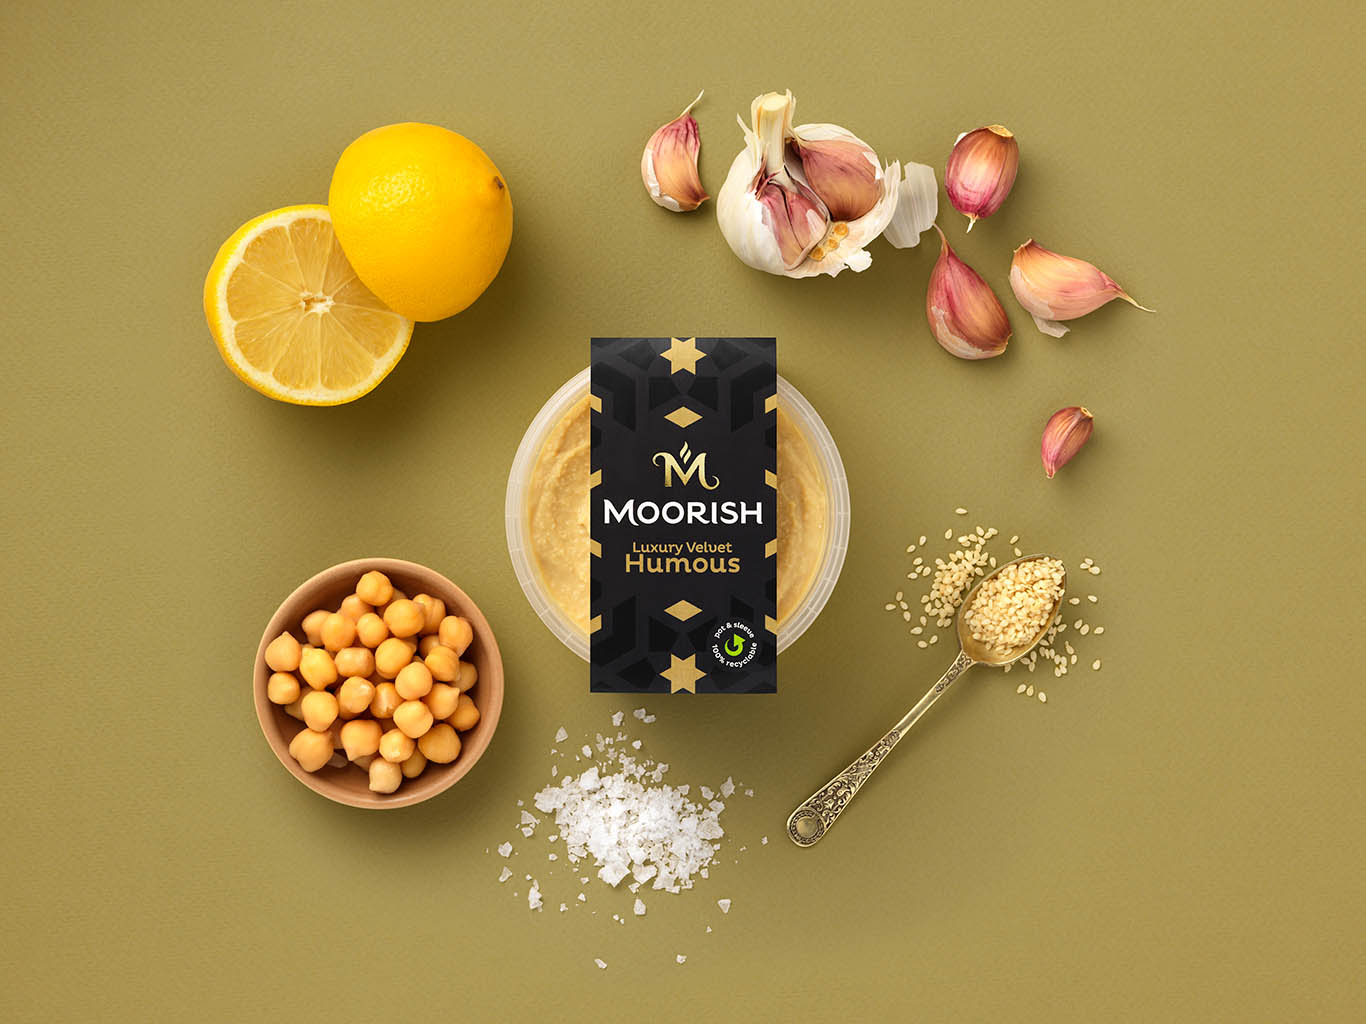 Food Photography of Moorish humous with ingredients by Packshot Factory